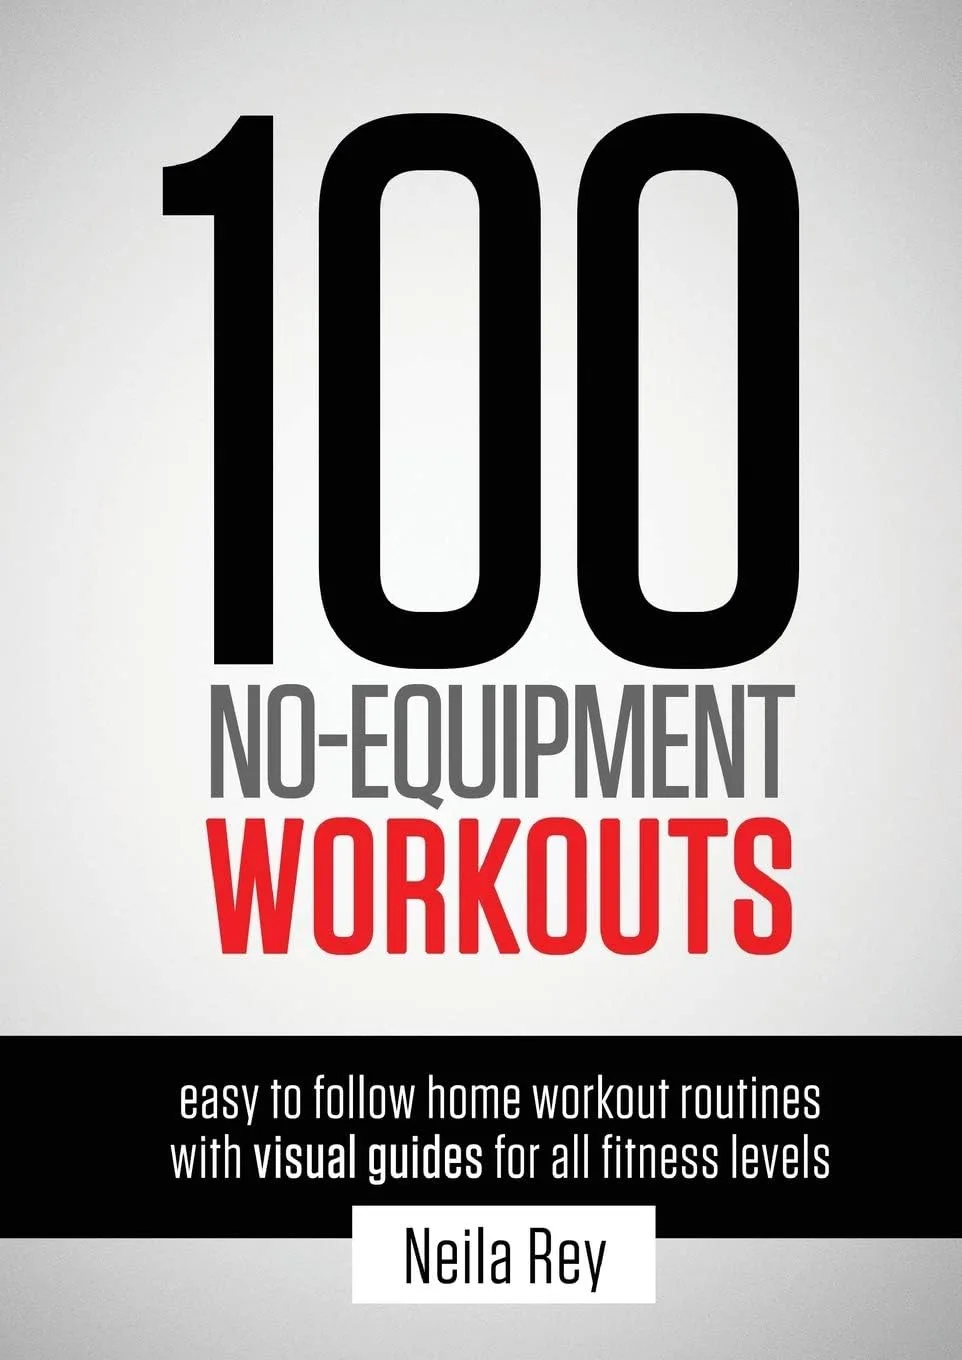 100 no equipment workouts vol 1 easy to follow home workout routines review jpg